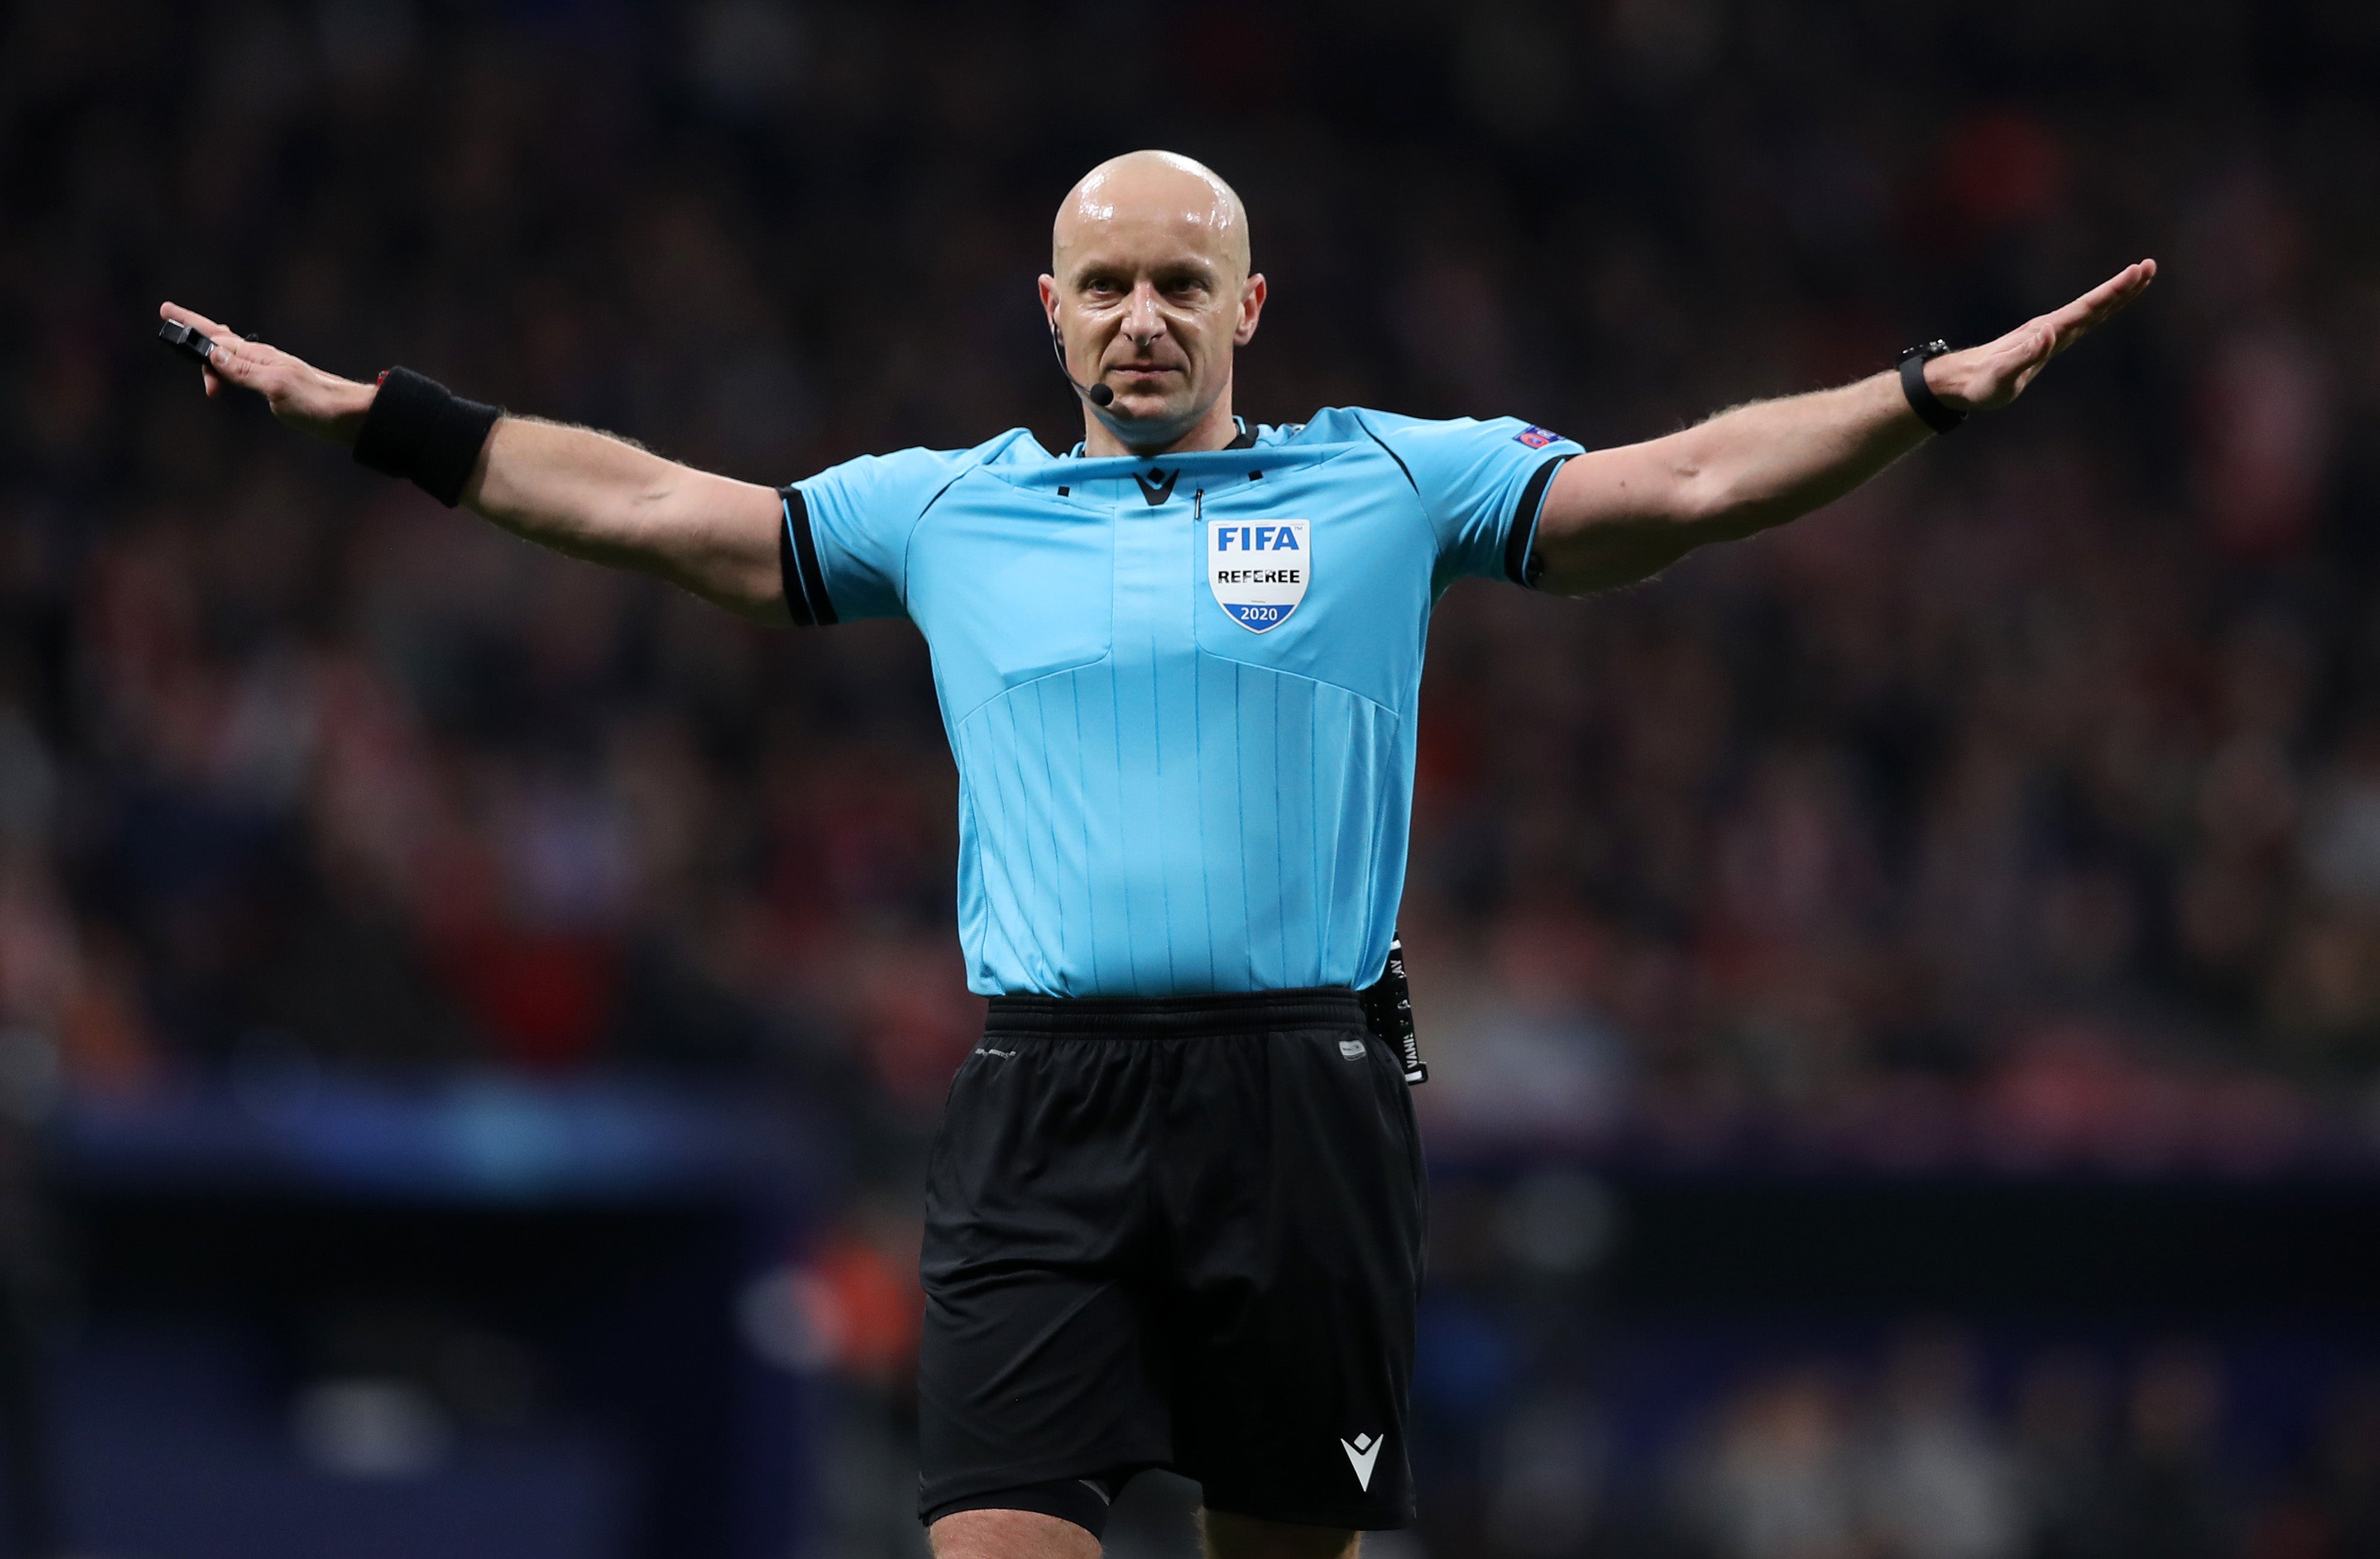  Szymon Marciniak, a bald male referee, is apologizing to Bayern Munich players after making a controversial call during a match.